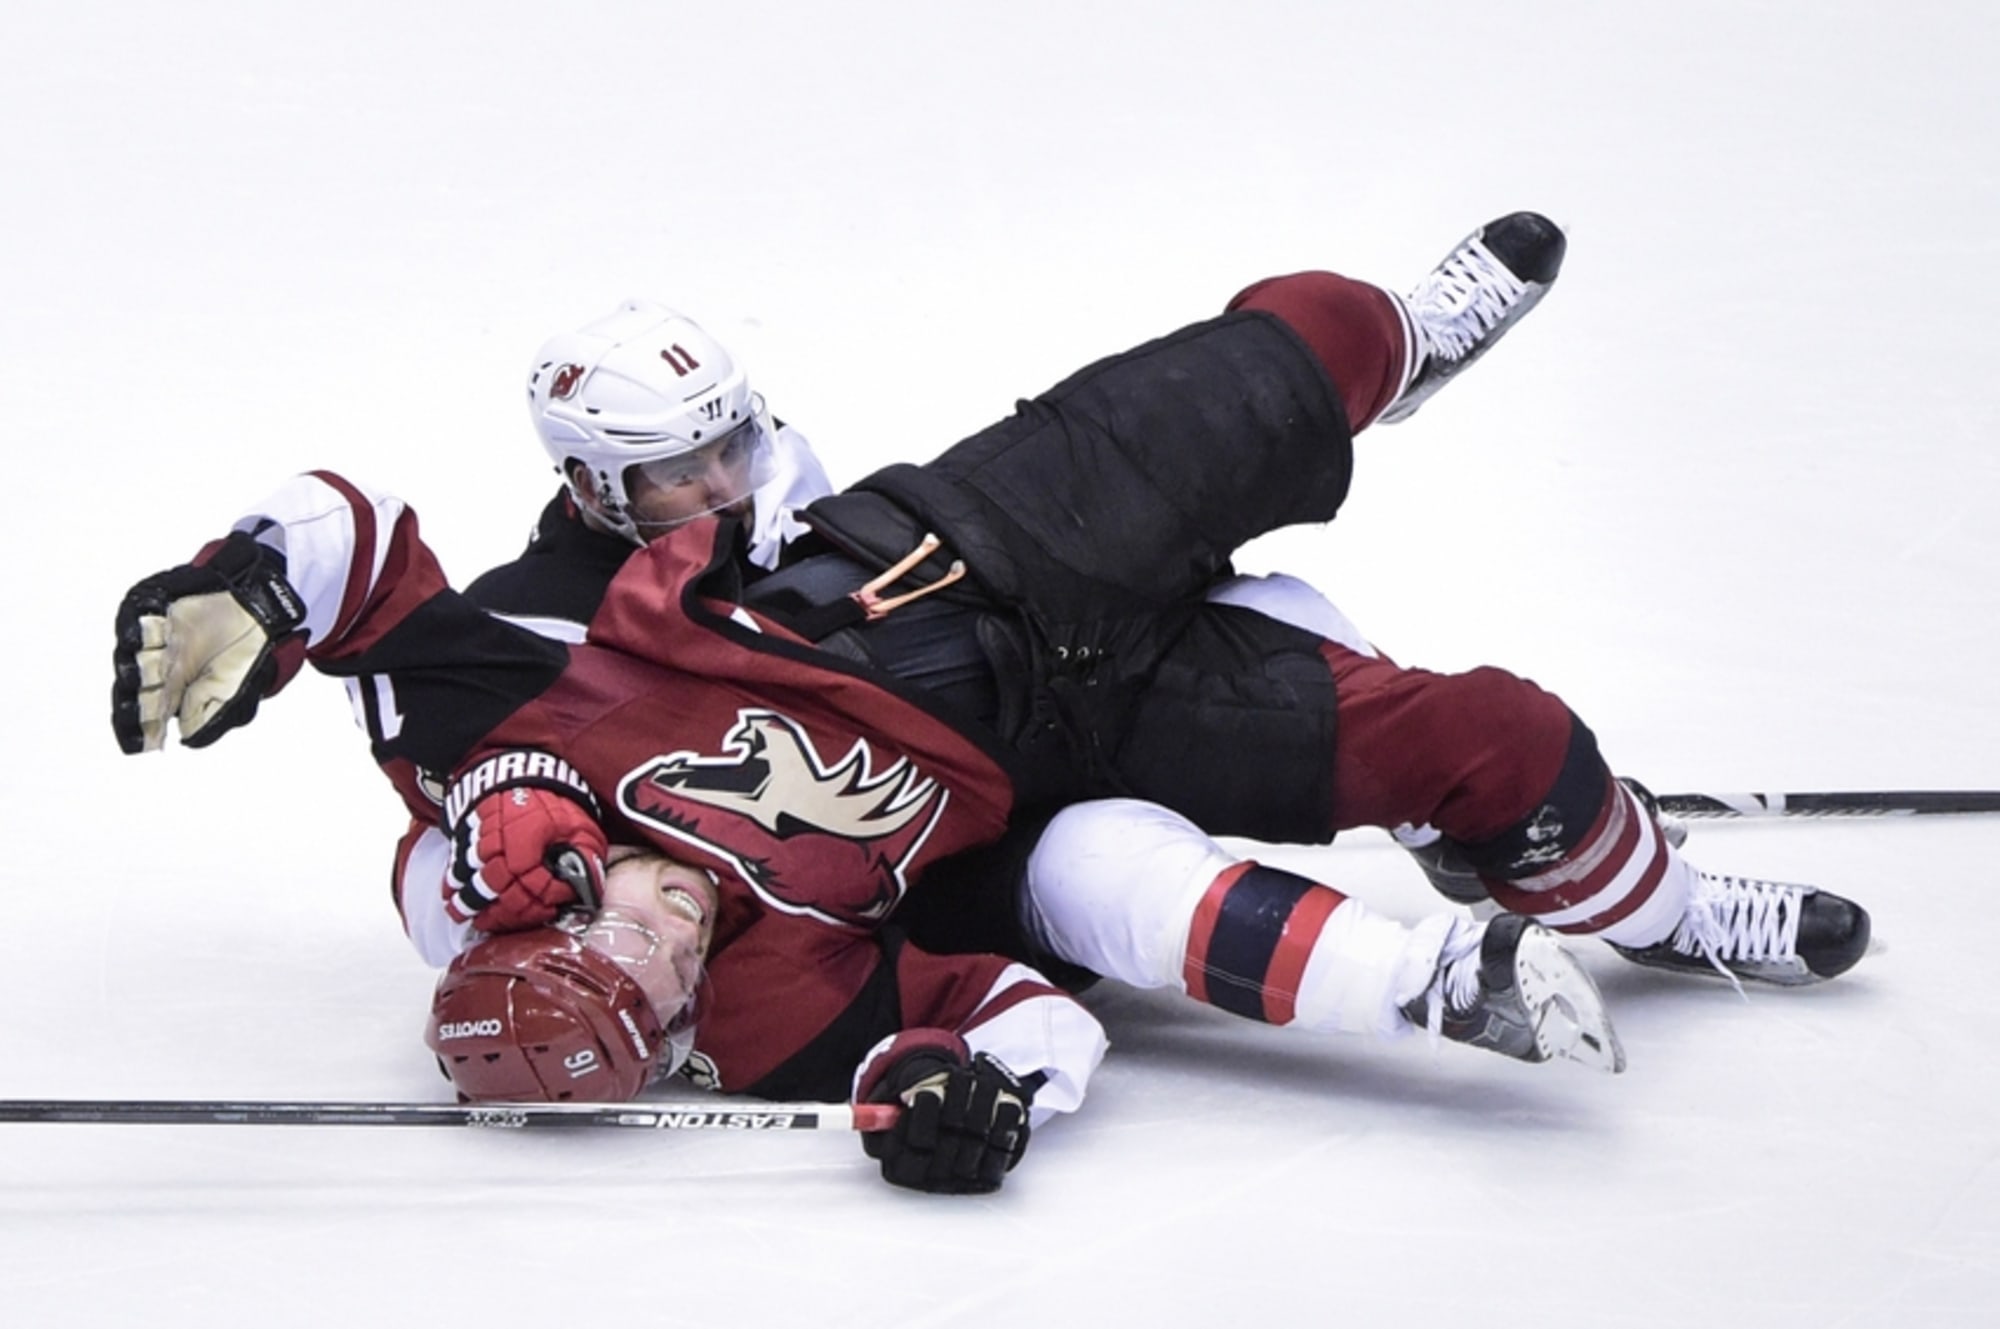 Coyotes move Jan. 16 game vs. Devils to noon